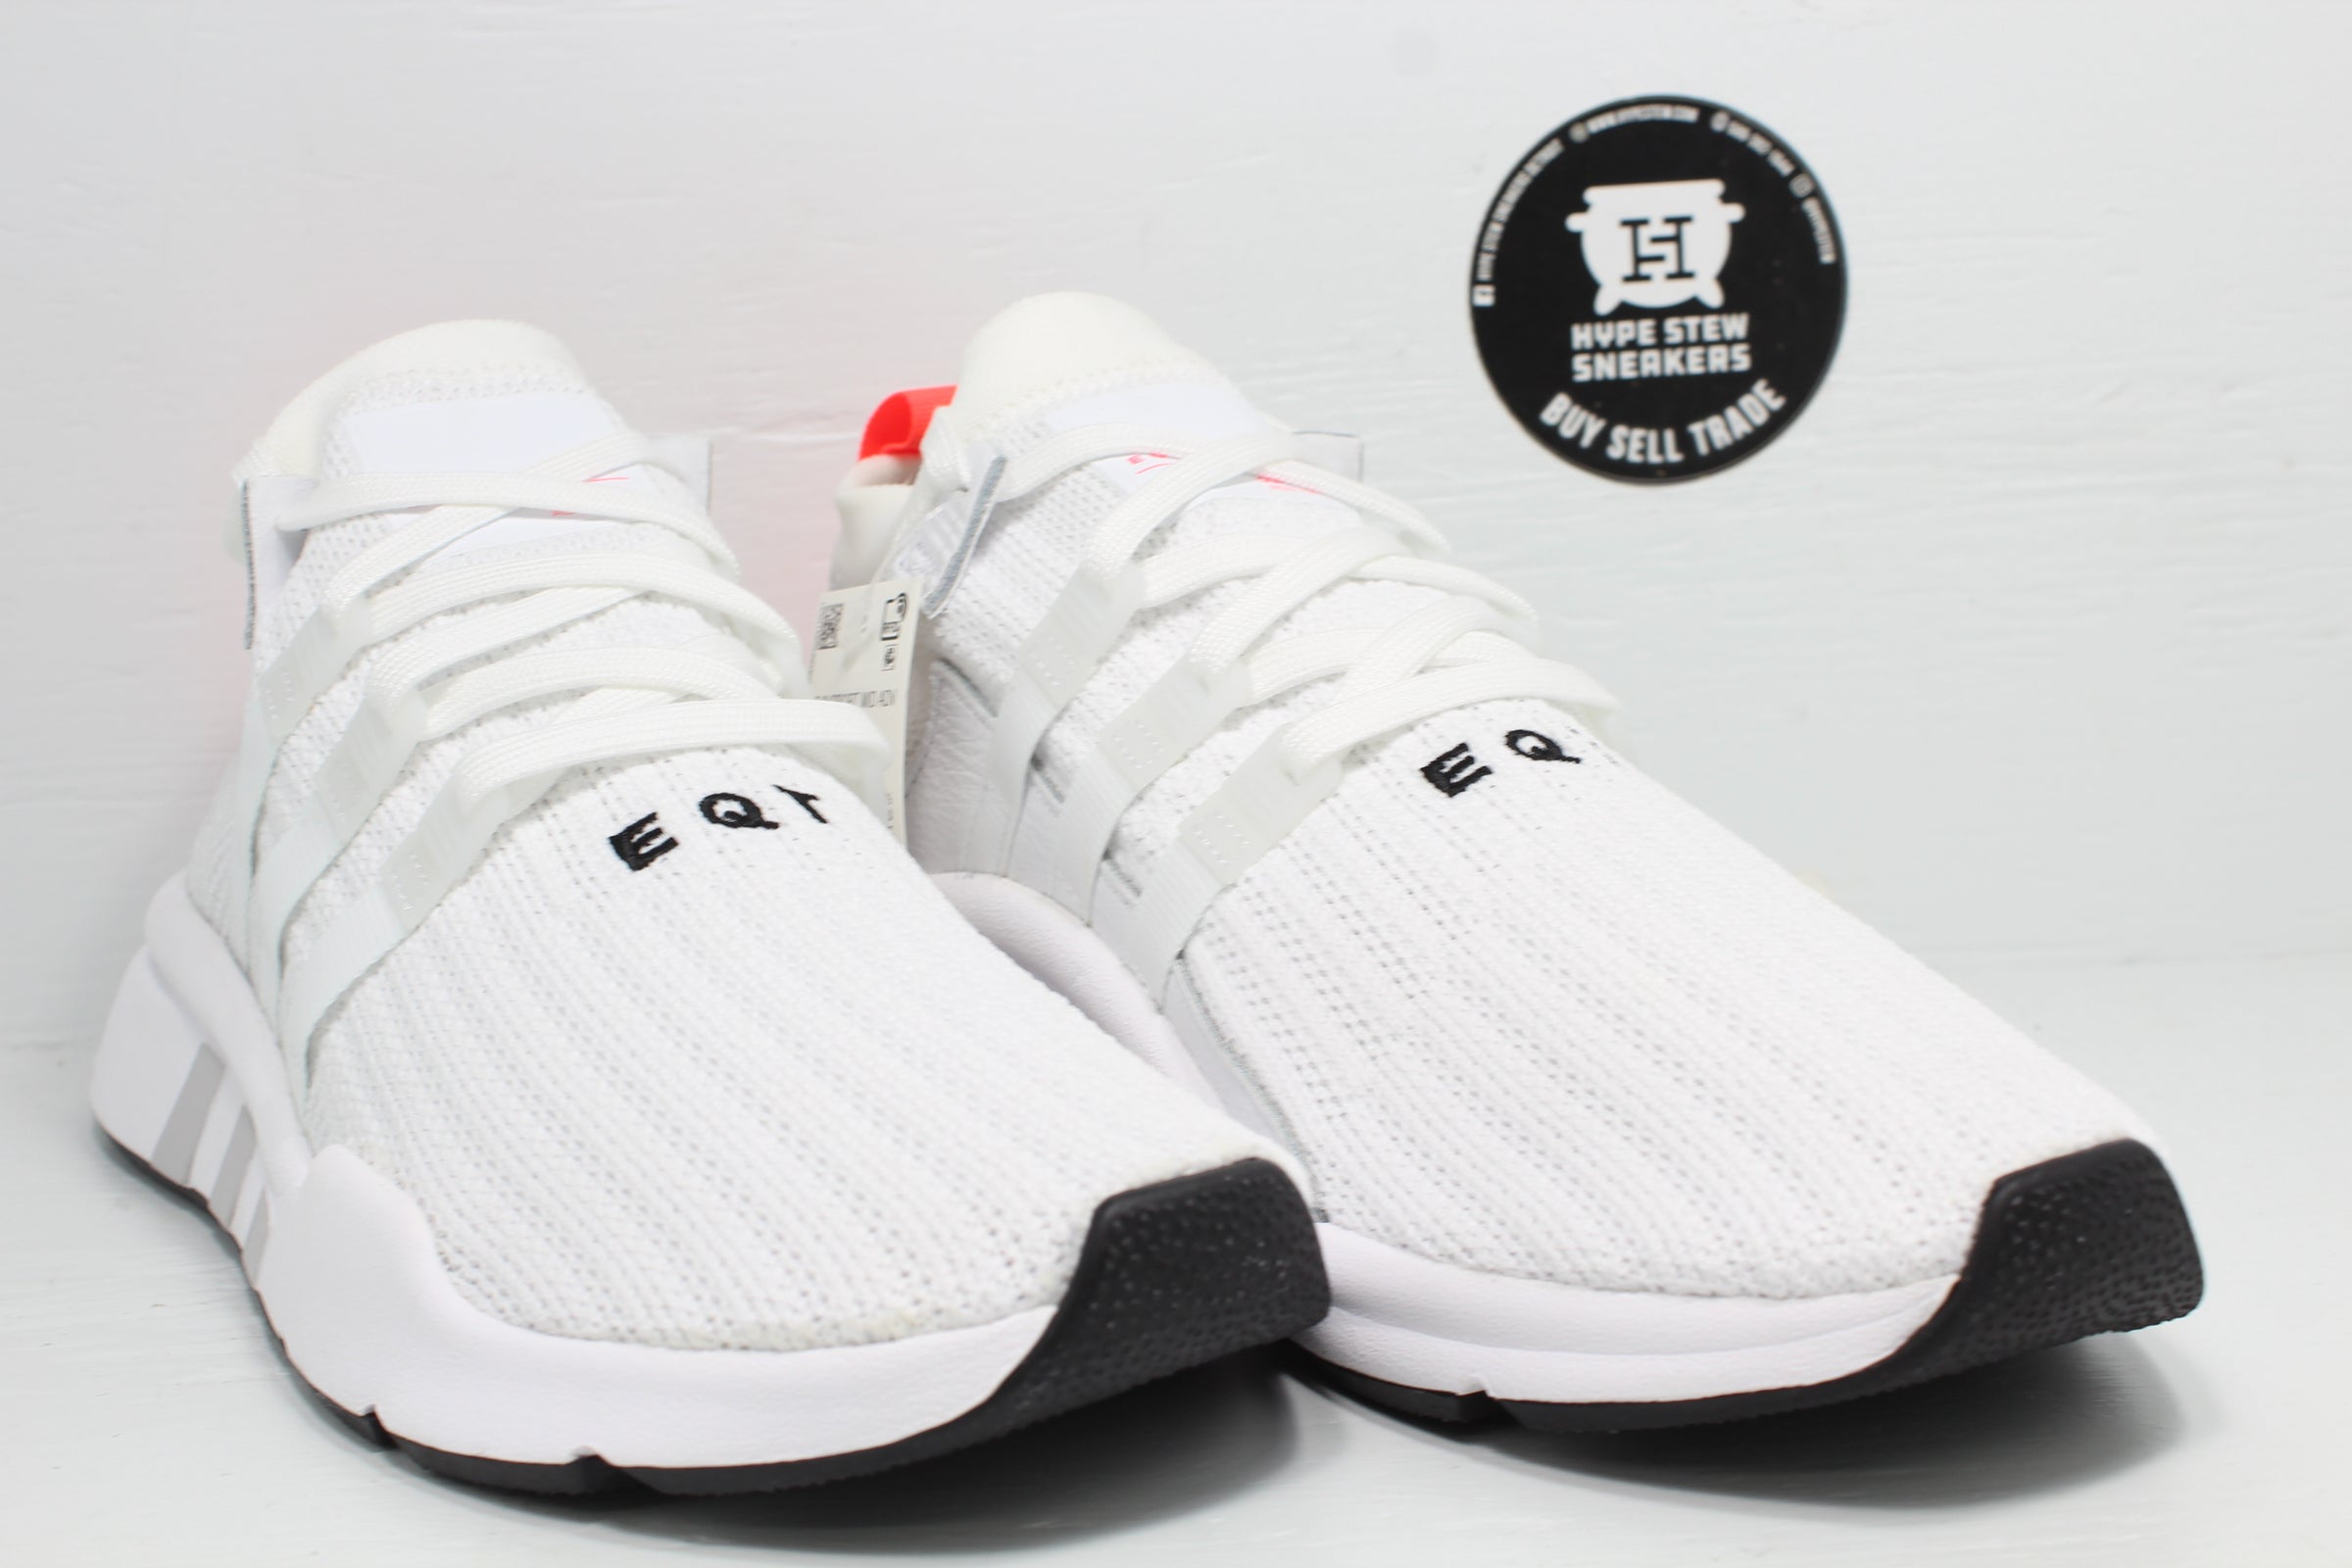 Asentar Empeorando Introducir Adidas EQT Support Mid ADV PK Cloud White | Hype Stew Sneakers Detroit